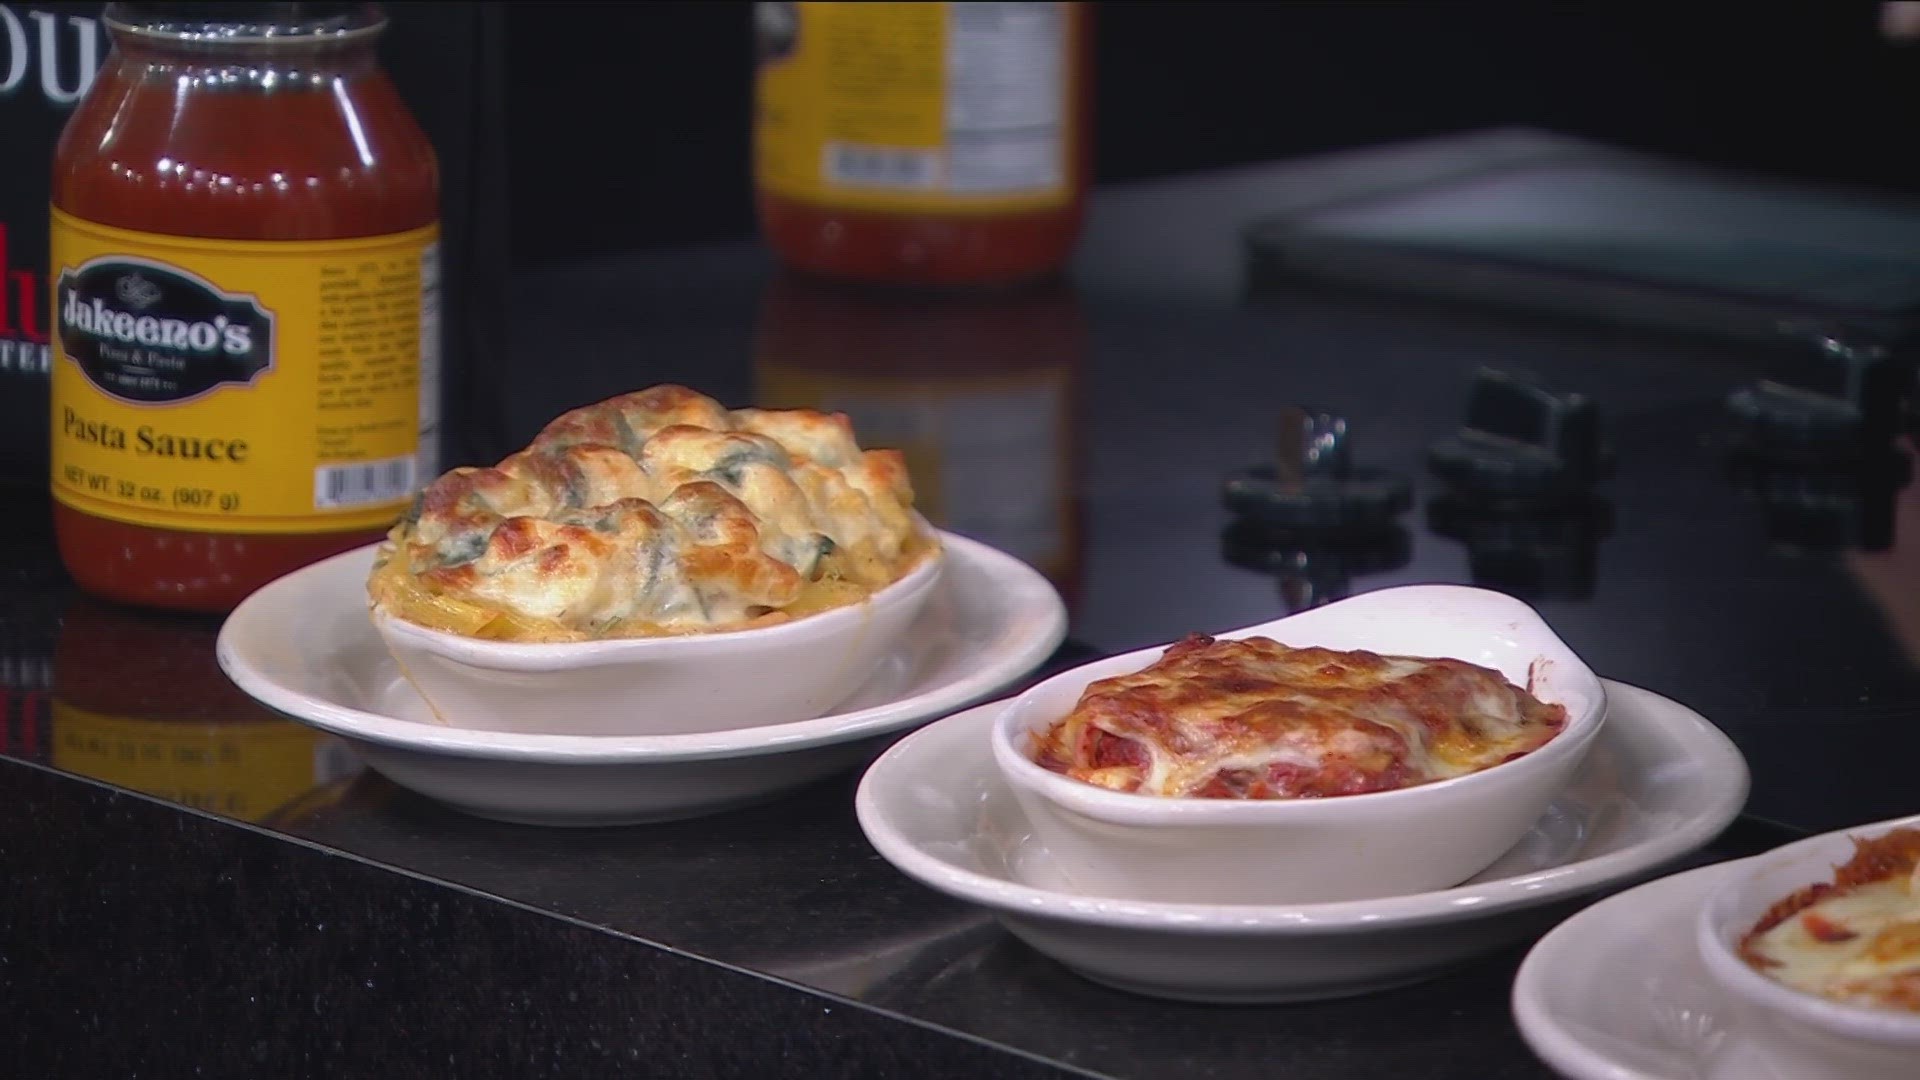 Patty Keegan shared one of their signature menu items that you can make at home.